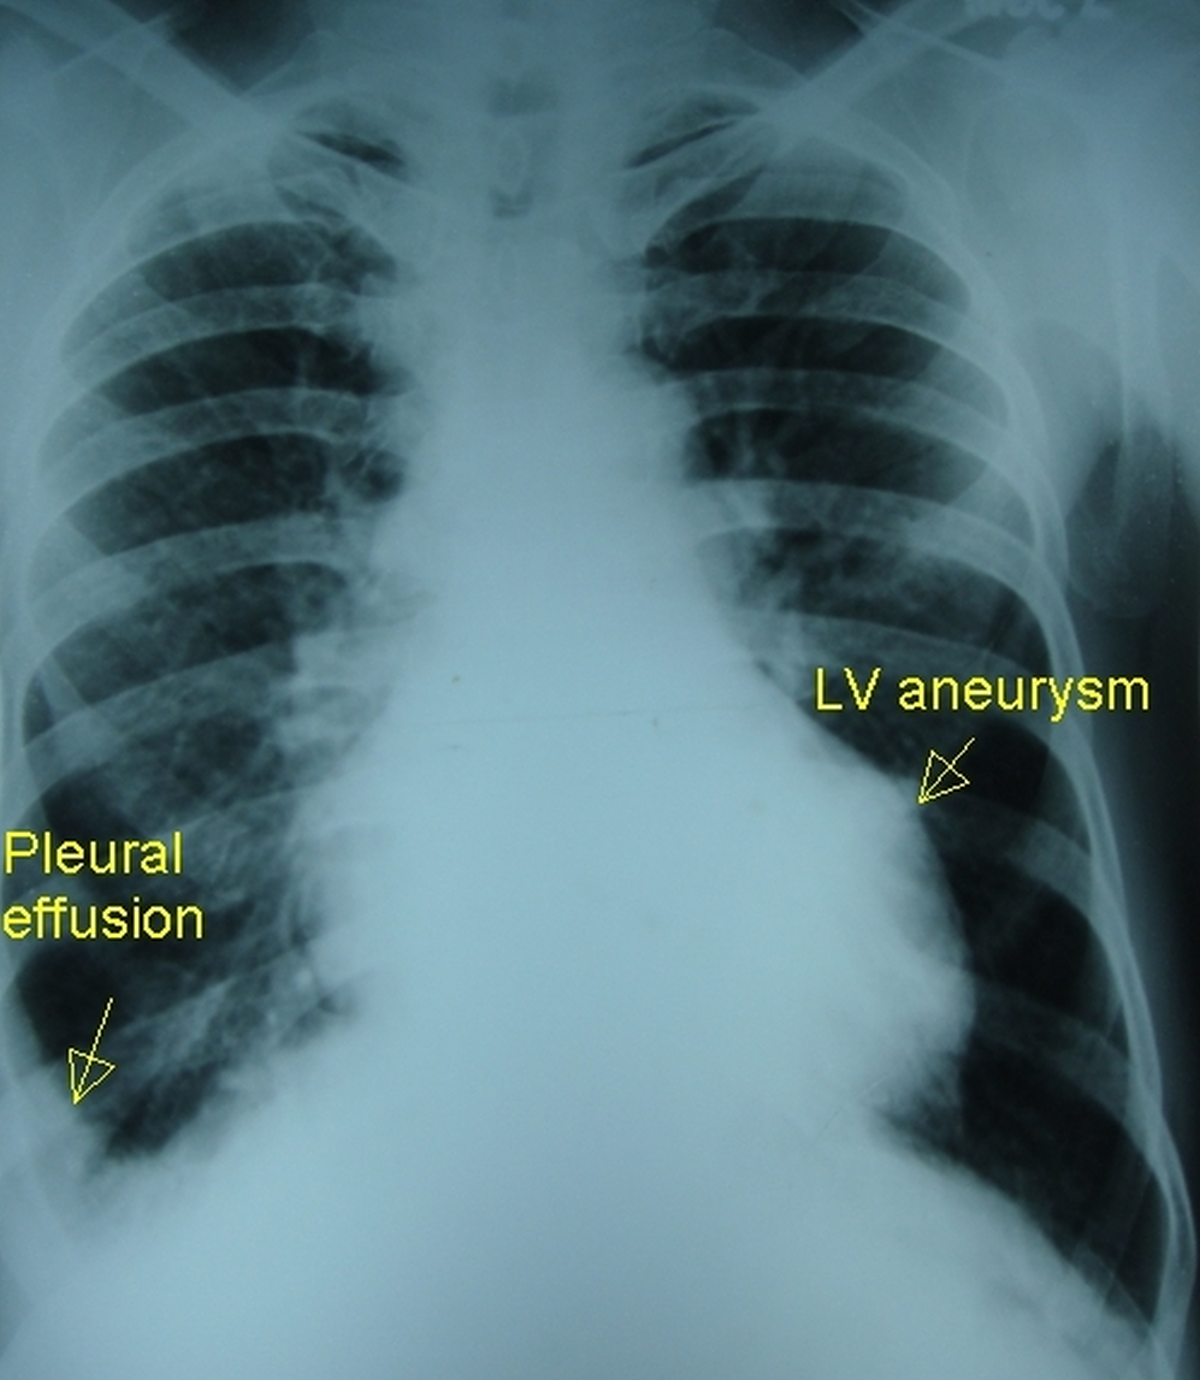 Left ventricular aneurysm and right pleural effusion - X-ray chest PA view - annotated